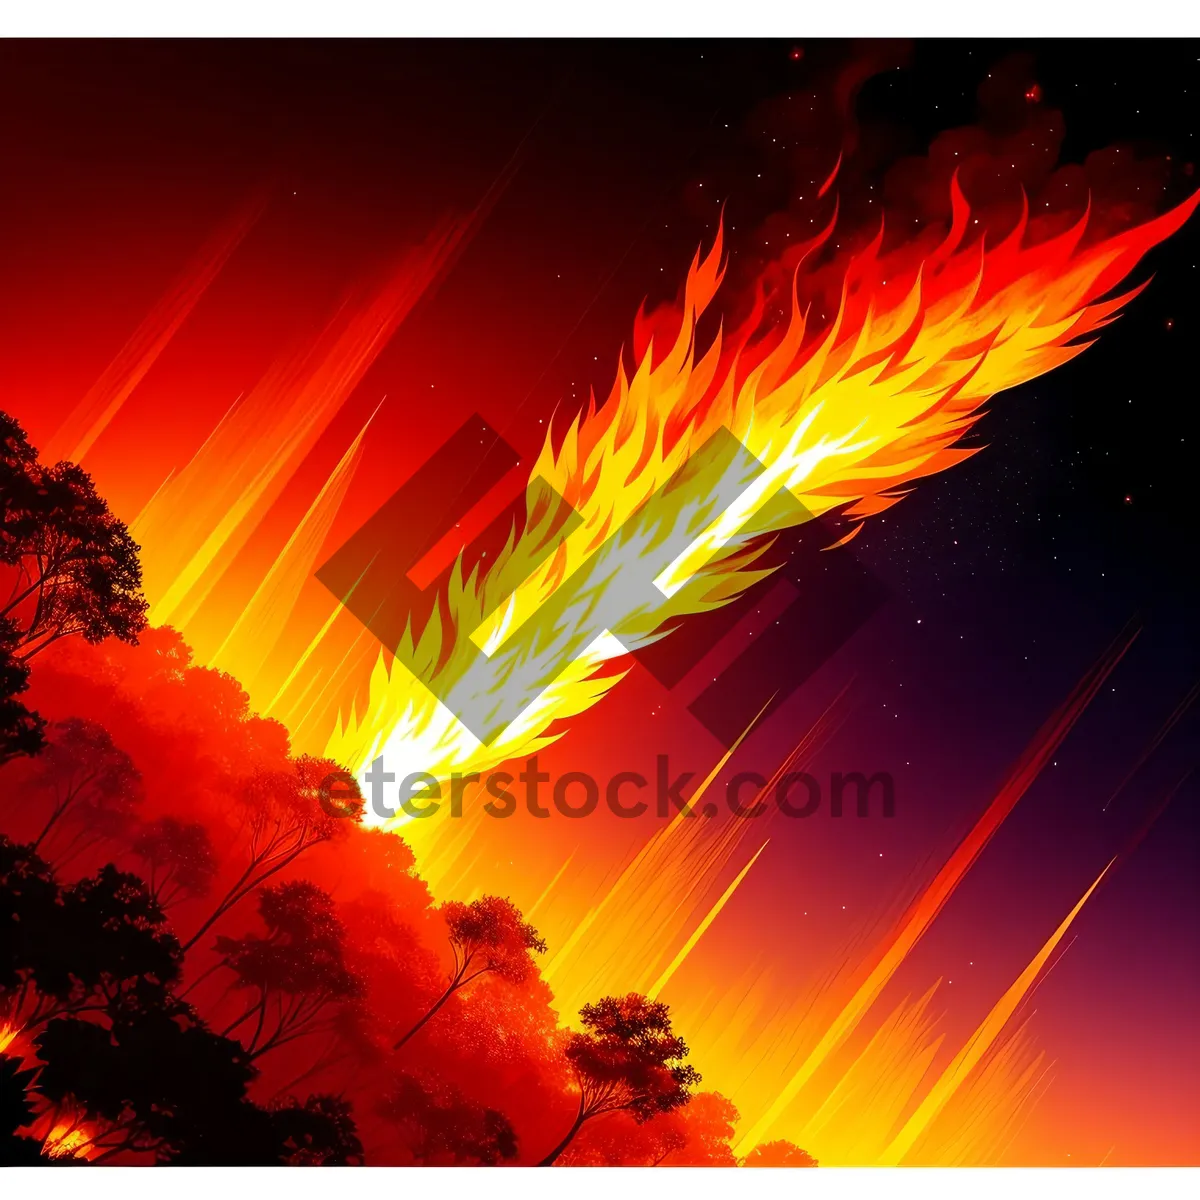 Picture of Colorful Celestial Fireworks Explosion in Night Sky